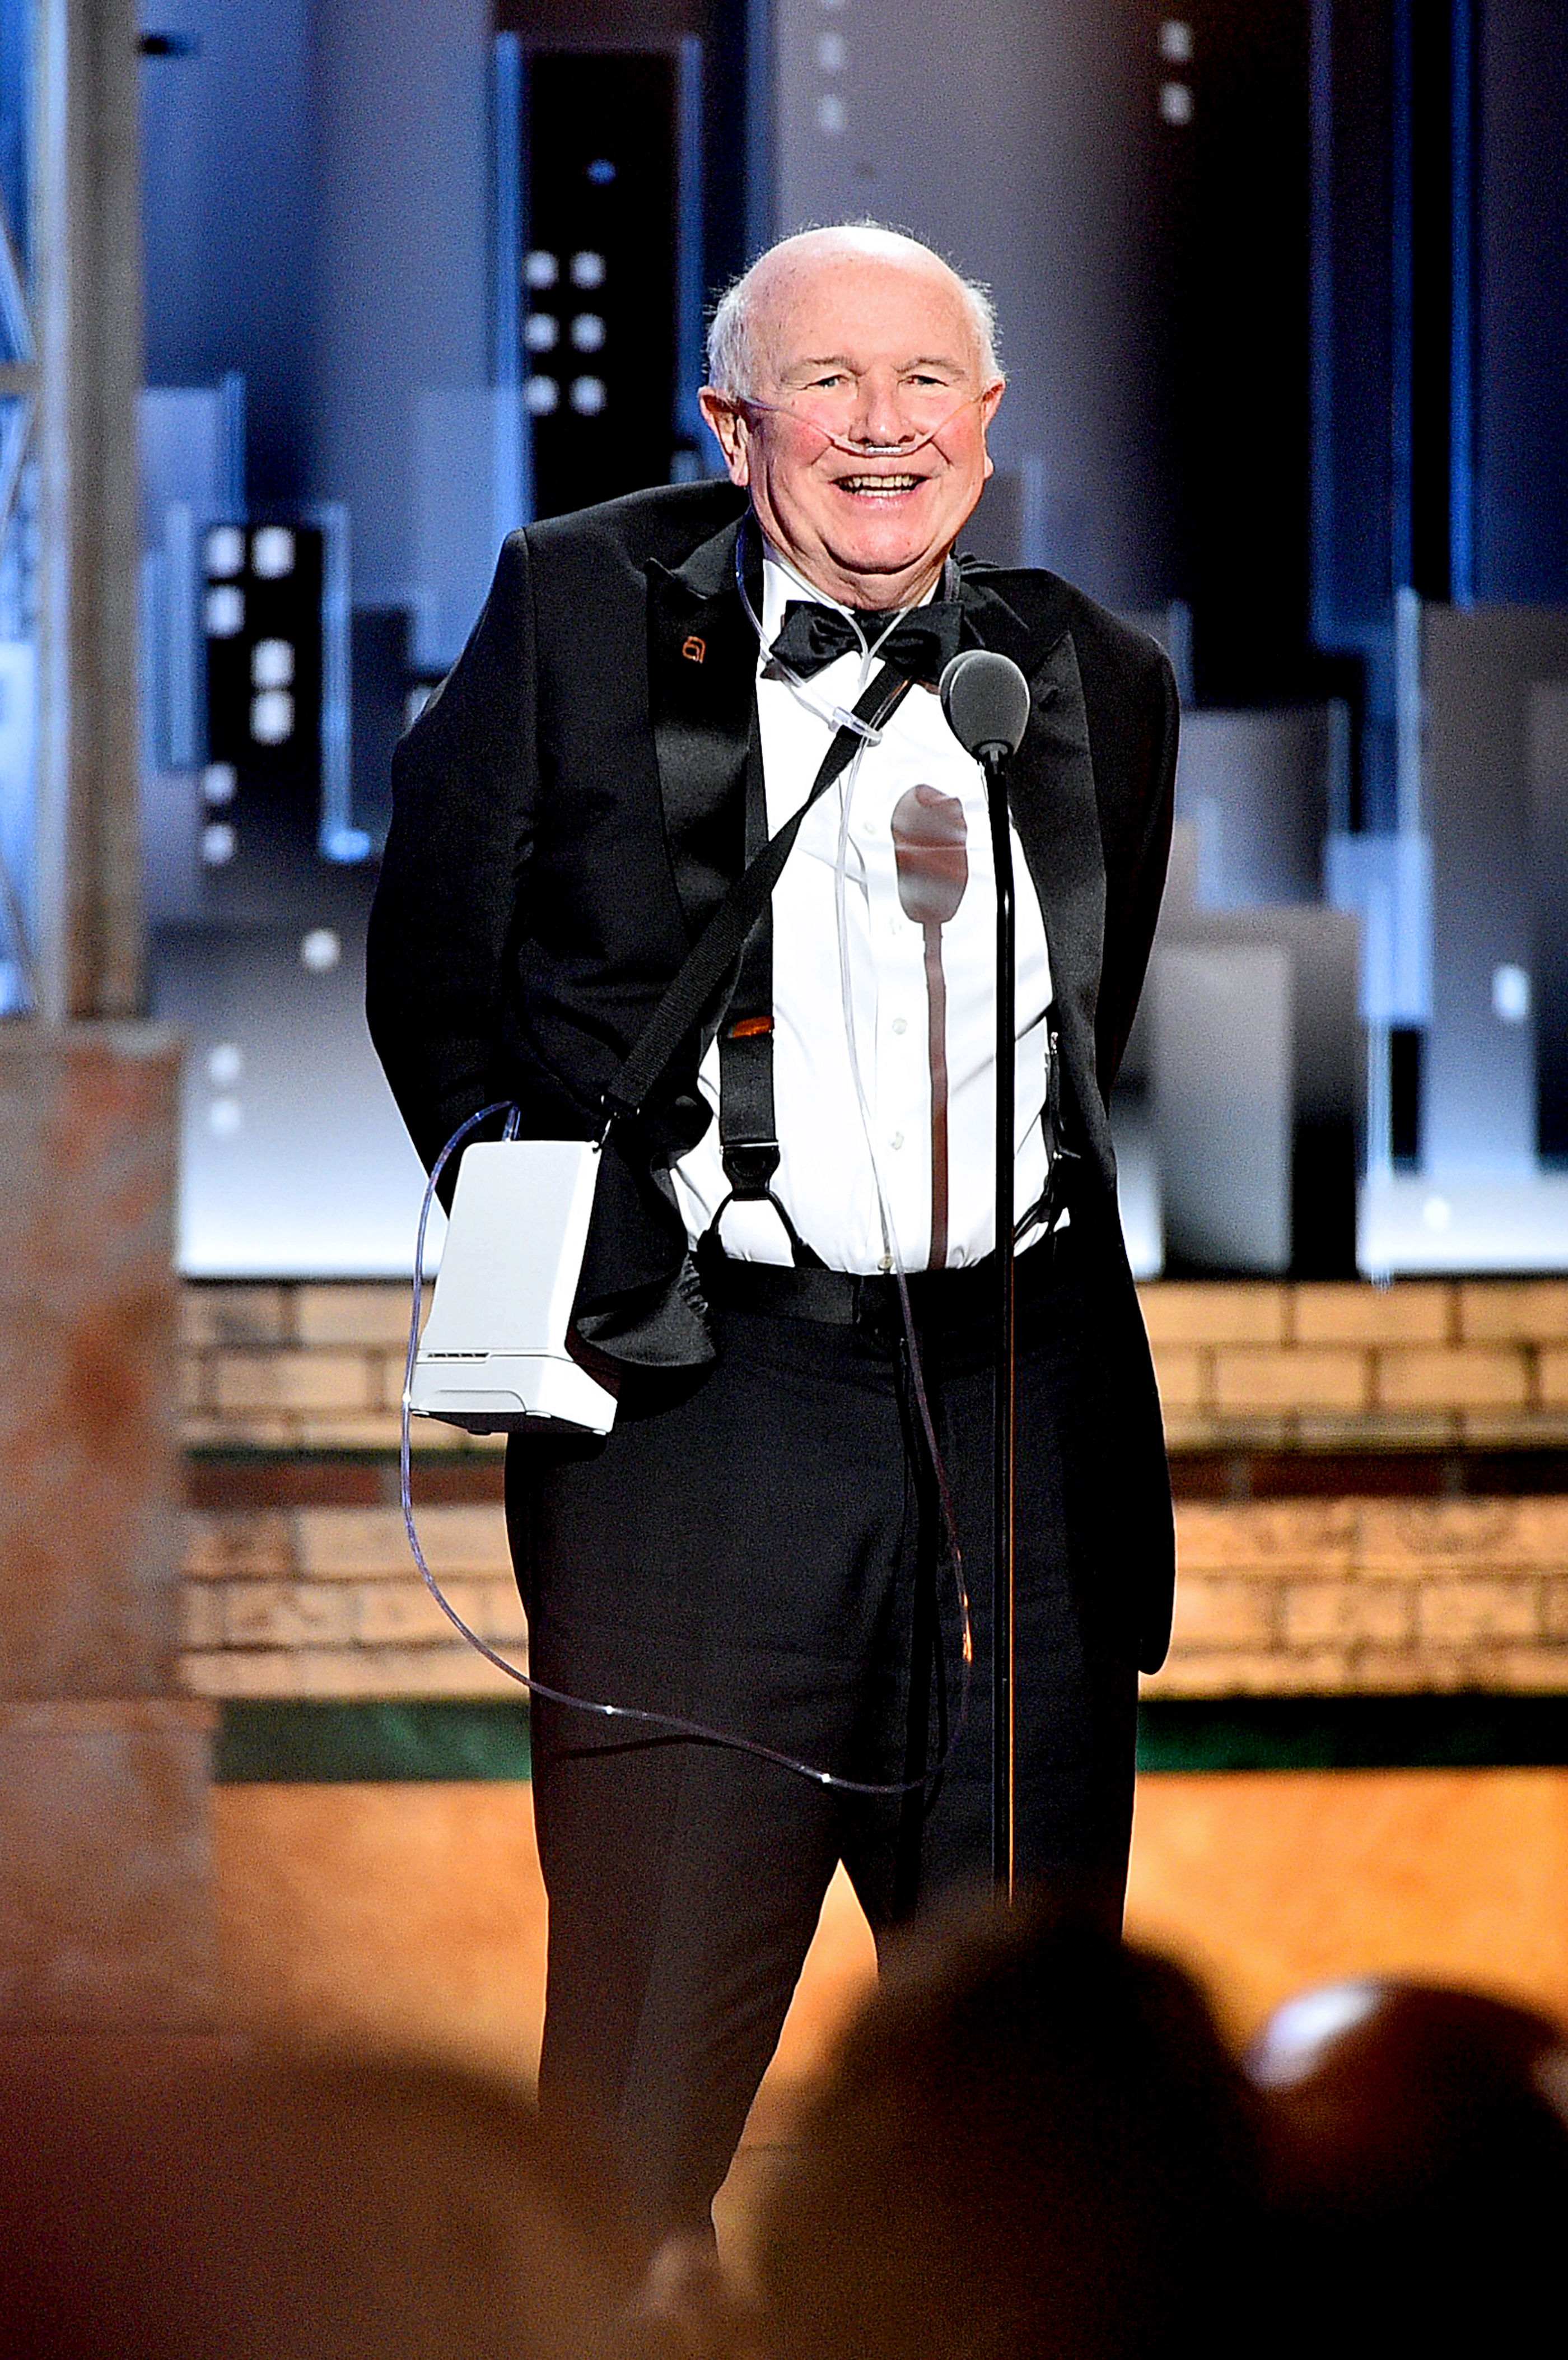 <p>On March 24, acclaimed playwright Terrence McNally passed away in a Florida hospital from complications caused by COVID-19. He was 81 and had previously survived lung cancer and was living with COPD. In 2018, he was inducted into the American Academy of Arts and Letters and in 2019, he was the recipient of a special Tony Award for lifetime achievement. His list of accolades also include four other Tonys (for writing the books for the musicals "Ragtime" and "Kiss of the Spider Woman" and penning the plays "Love! Valour! Compassion!" and "Master Class") and an Emmy for writing the TV version of his play "Andre's Mother" as well as two Guggenheim fellowships.</p>